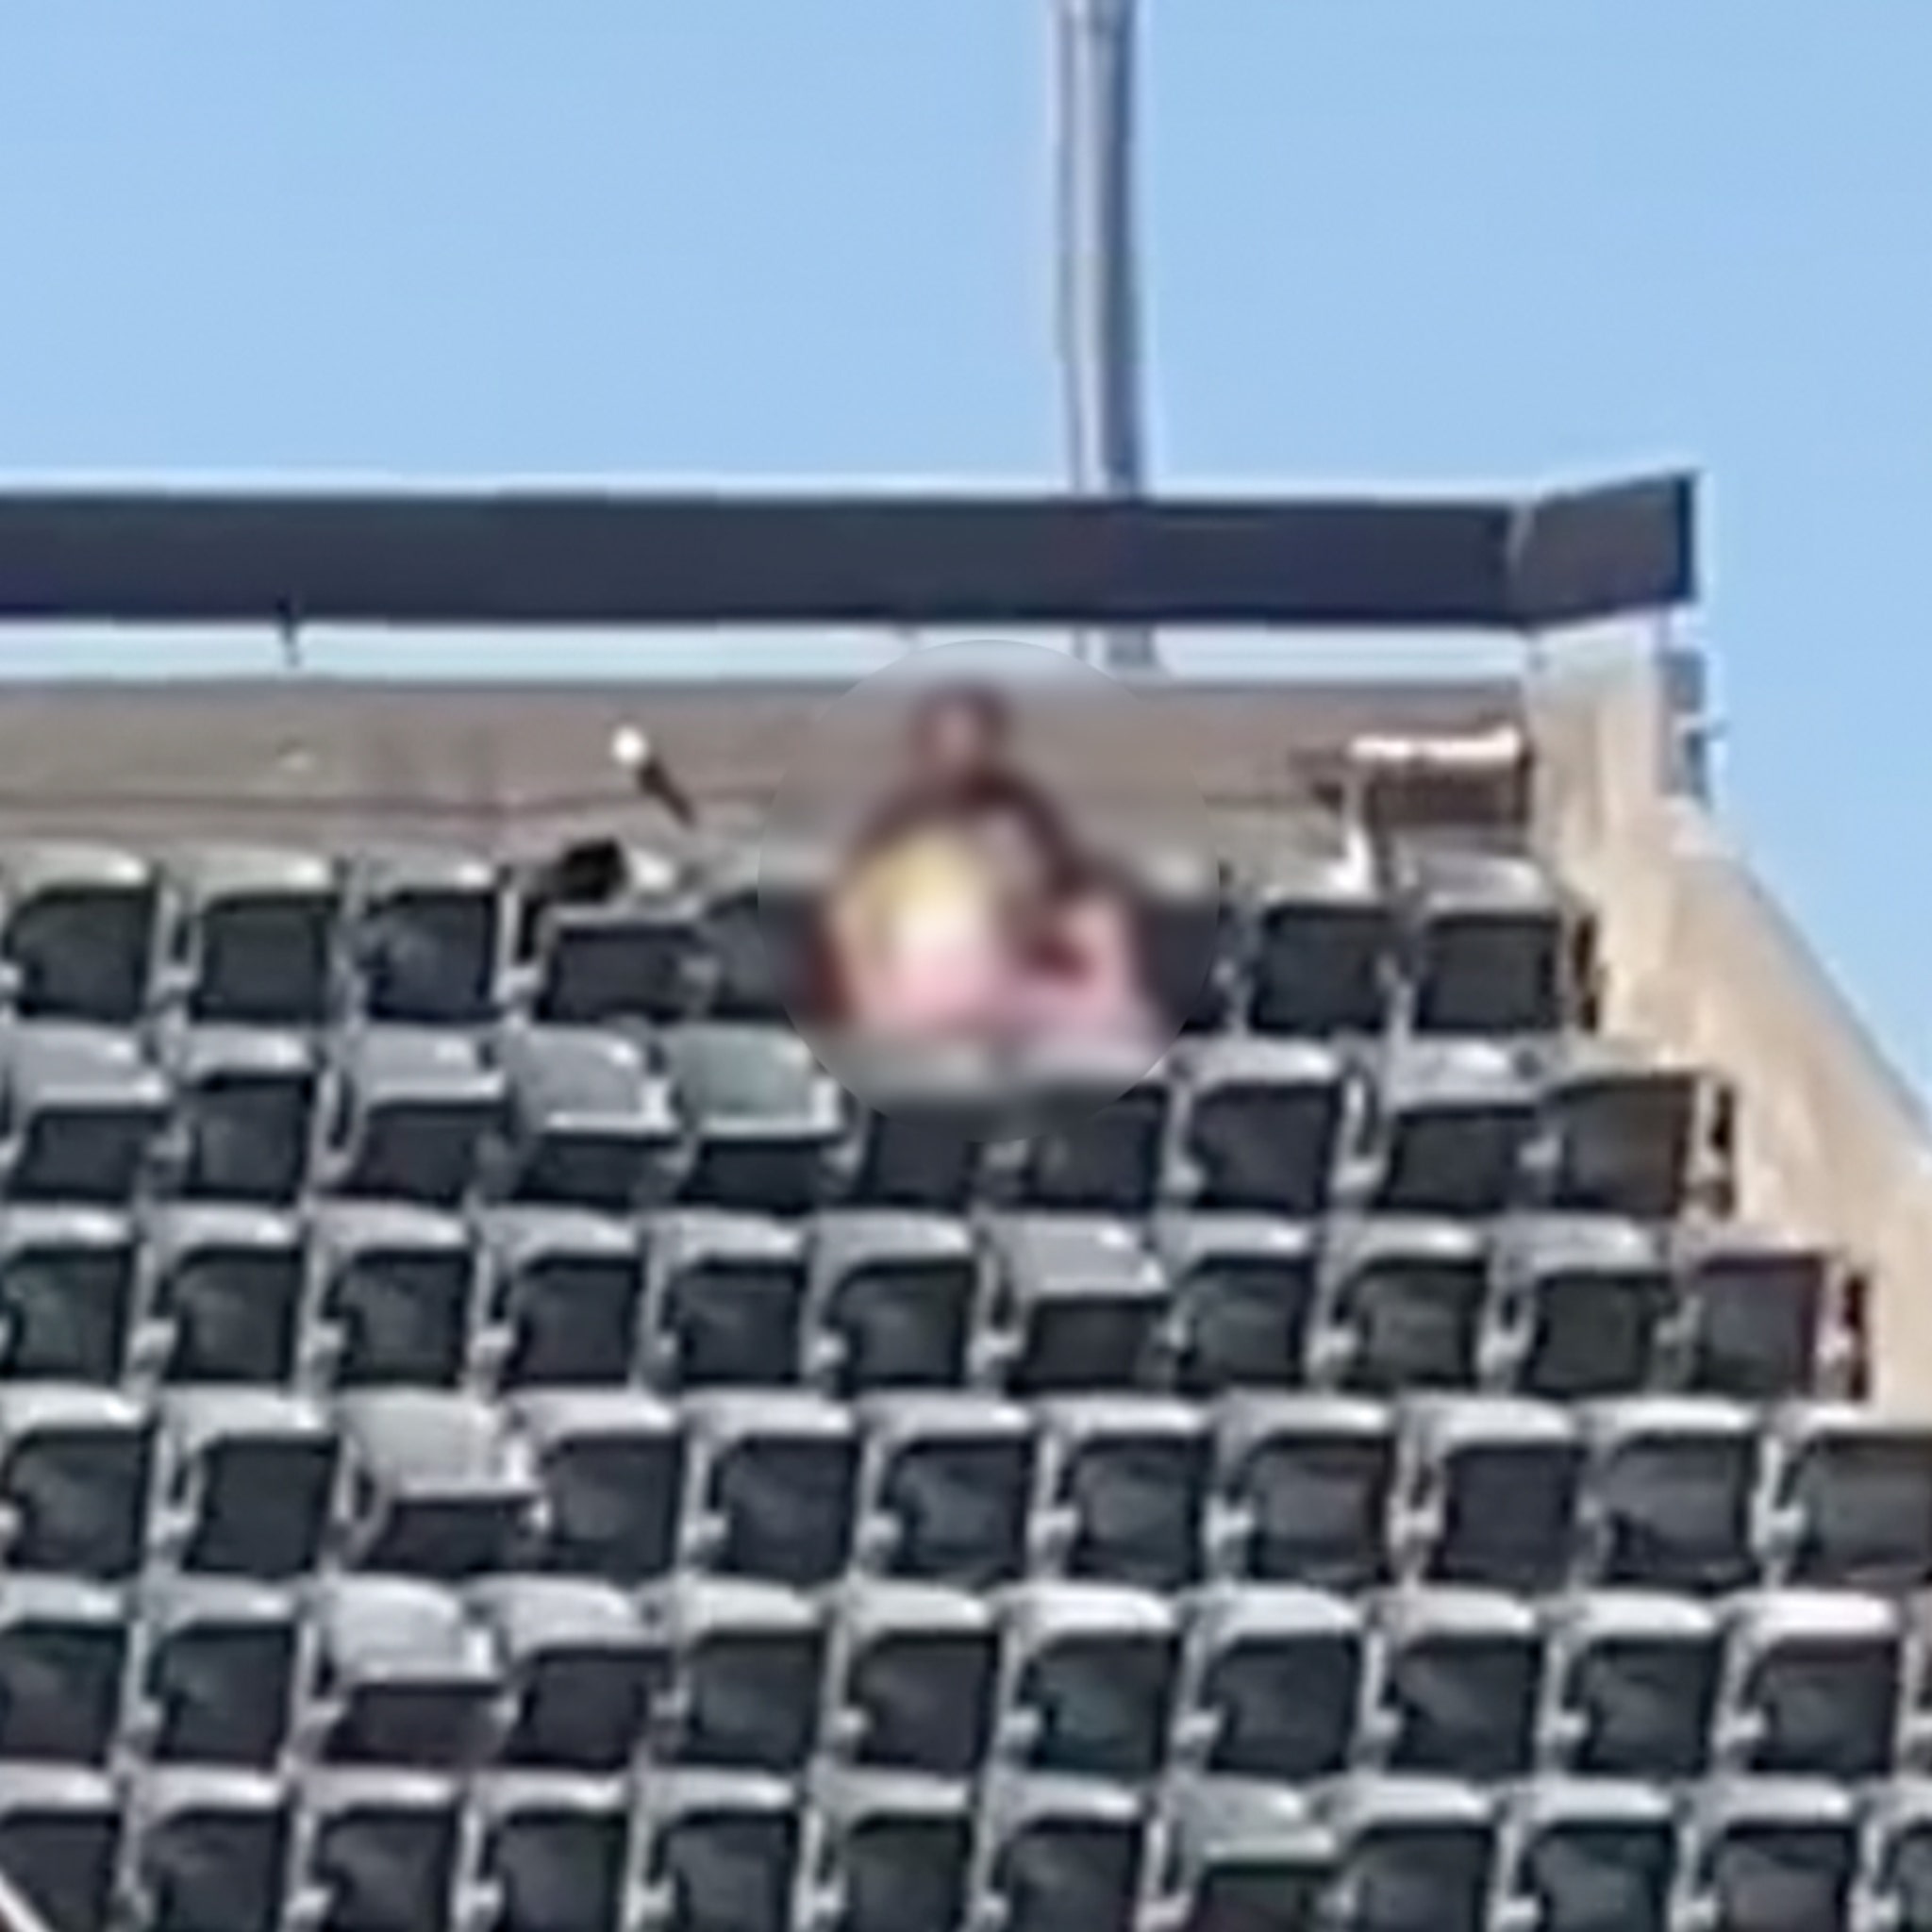 Cops Investigating Alleged Sex Act In Stands At Oakland As Game image pic